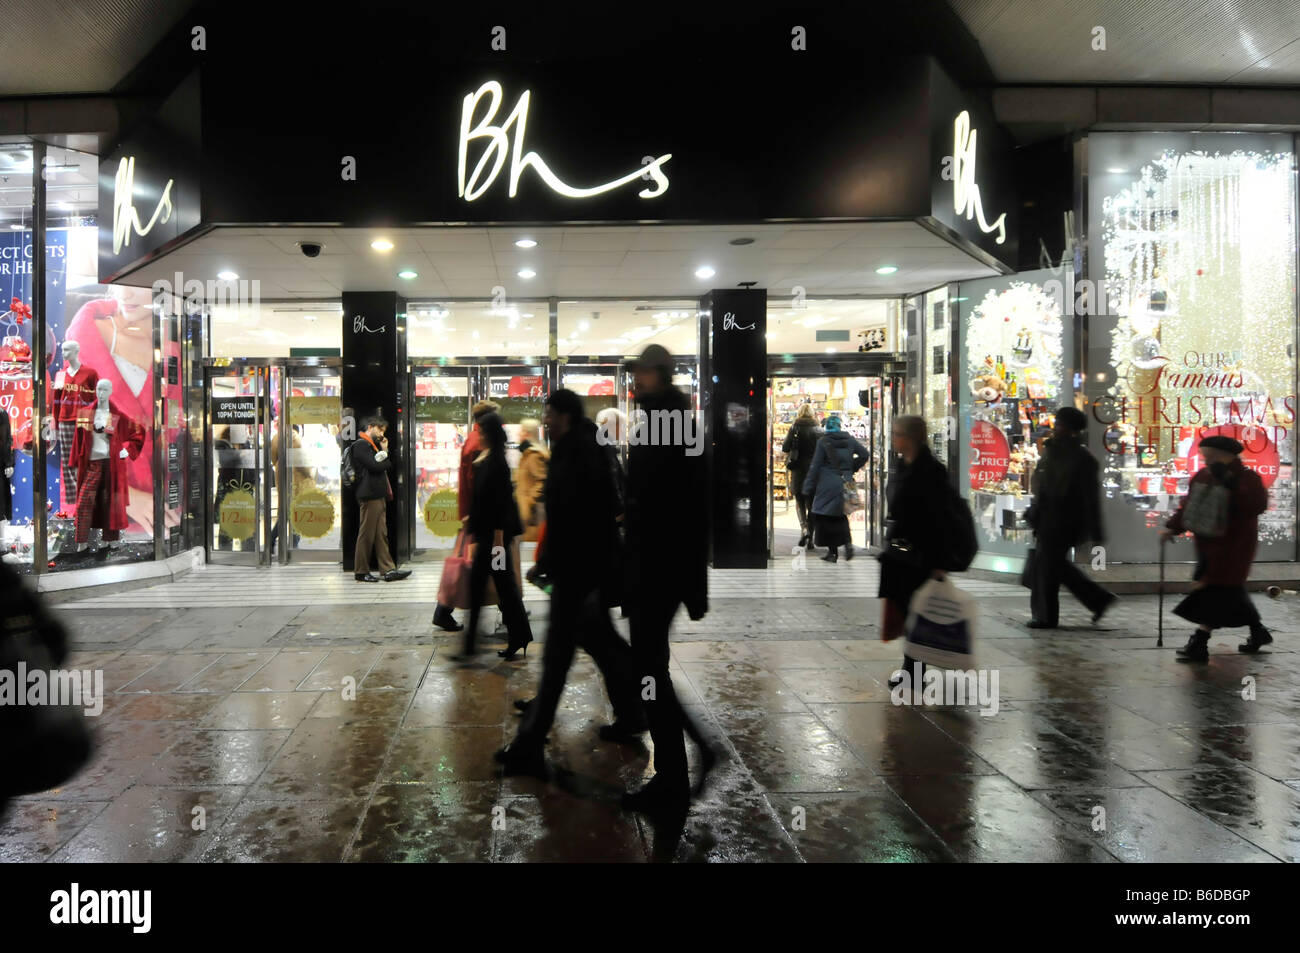 London Oxford Street silhouette shoppers walking on wet pavement West End BHS British Home Stores retail business shop front sign UK shopping street Stock Photo